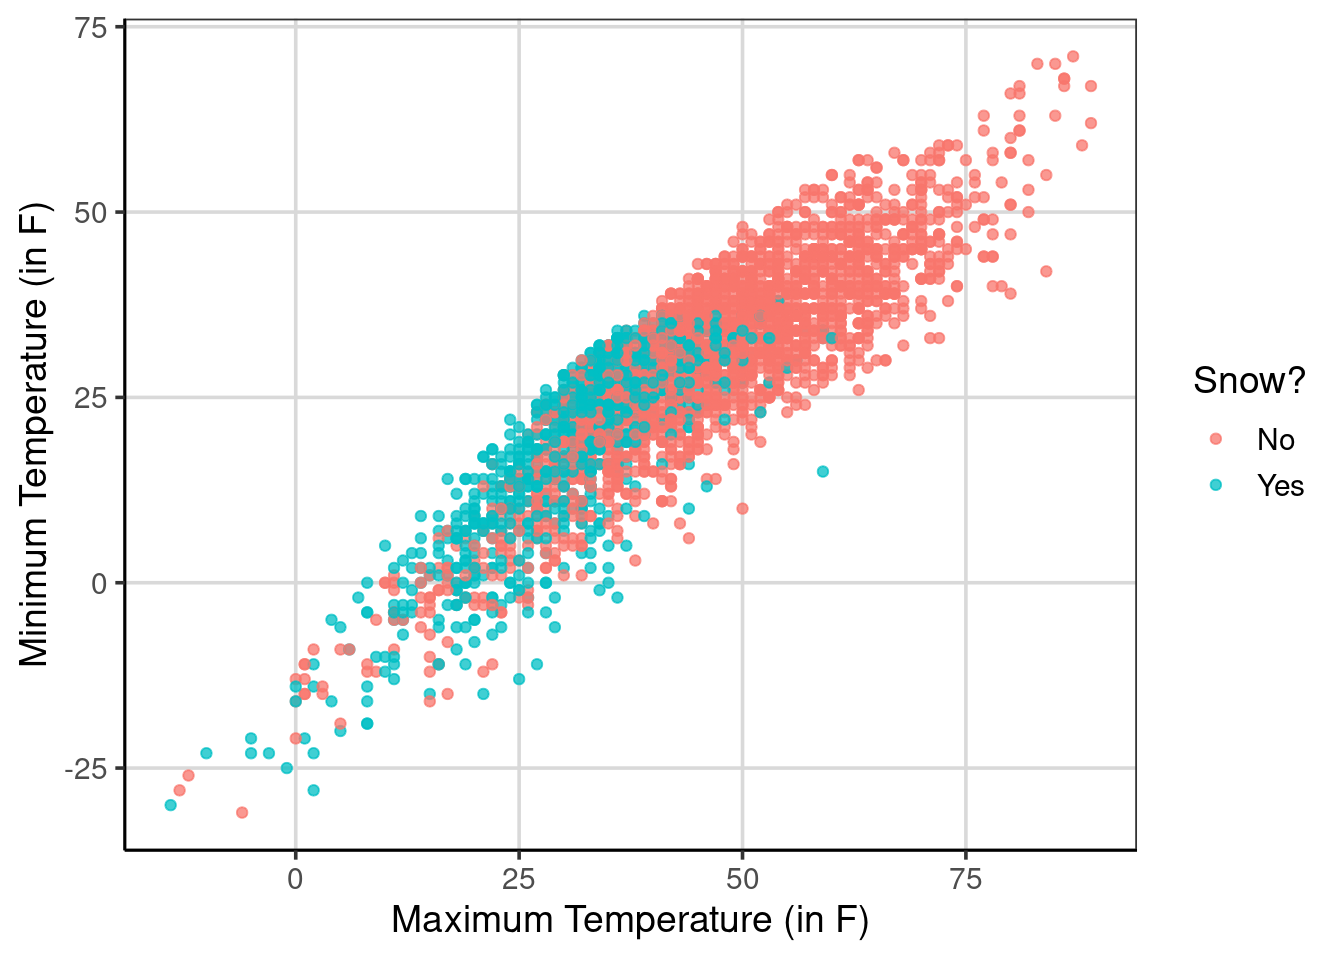 Scatterplot of the minimum and maximum daily temperatures and if it snows or not